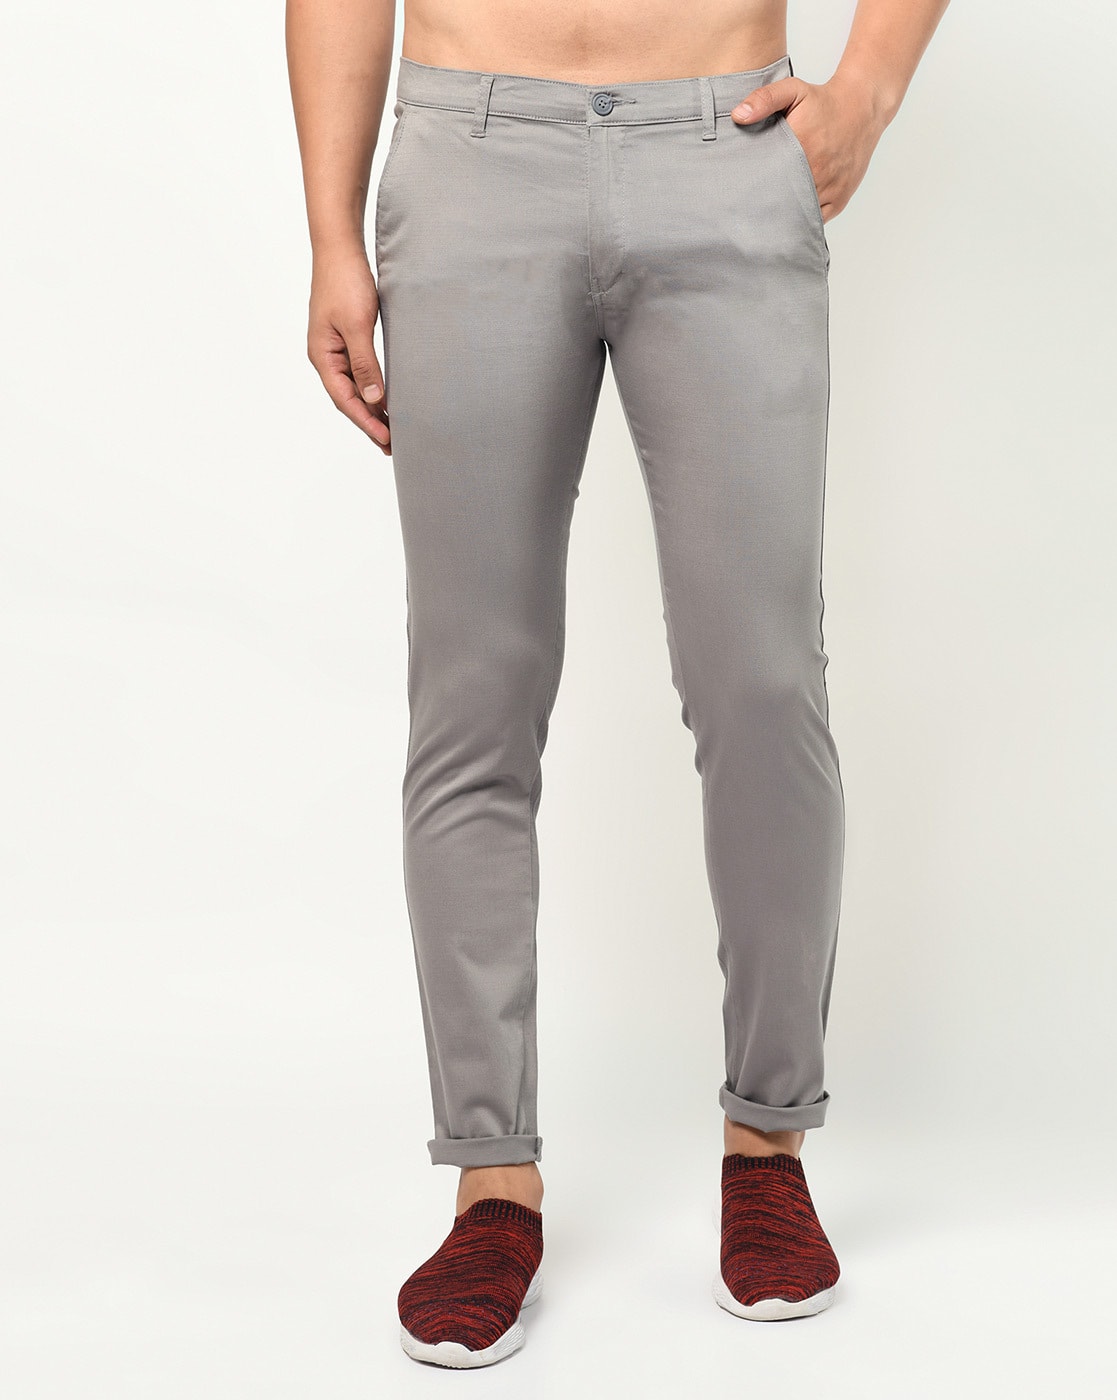 DOCKERS CHINOS TROUSERS W34 L34  agitecloset